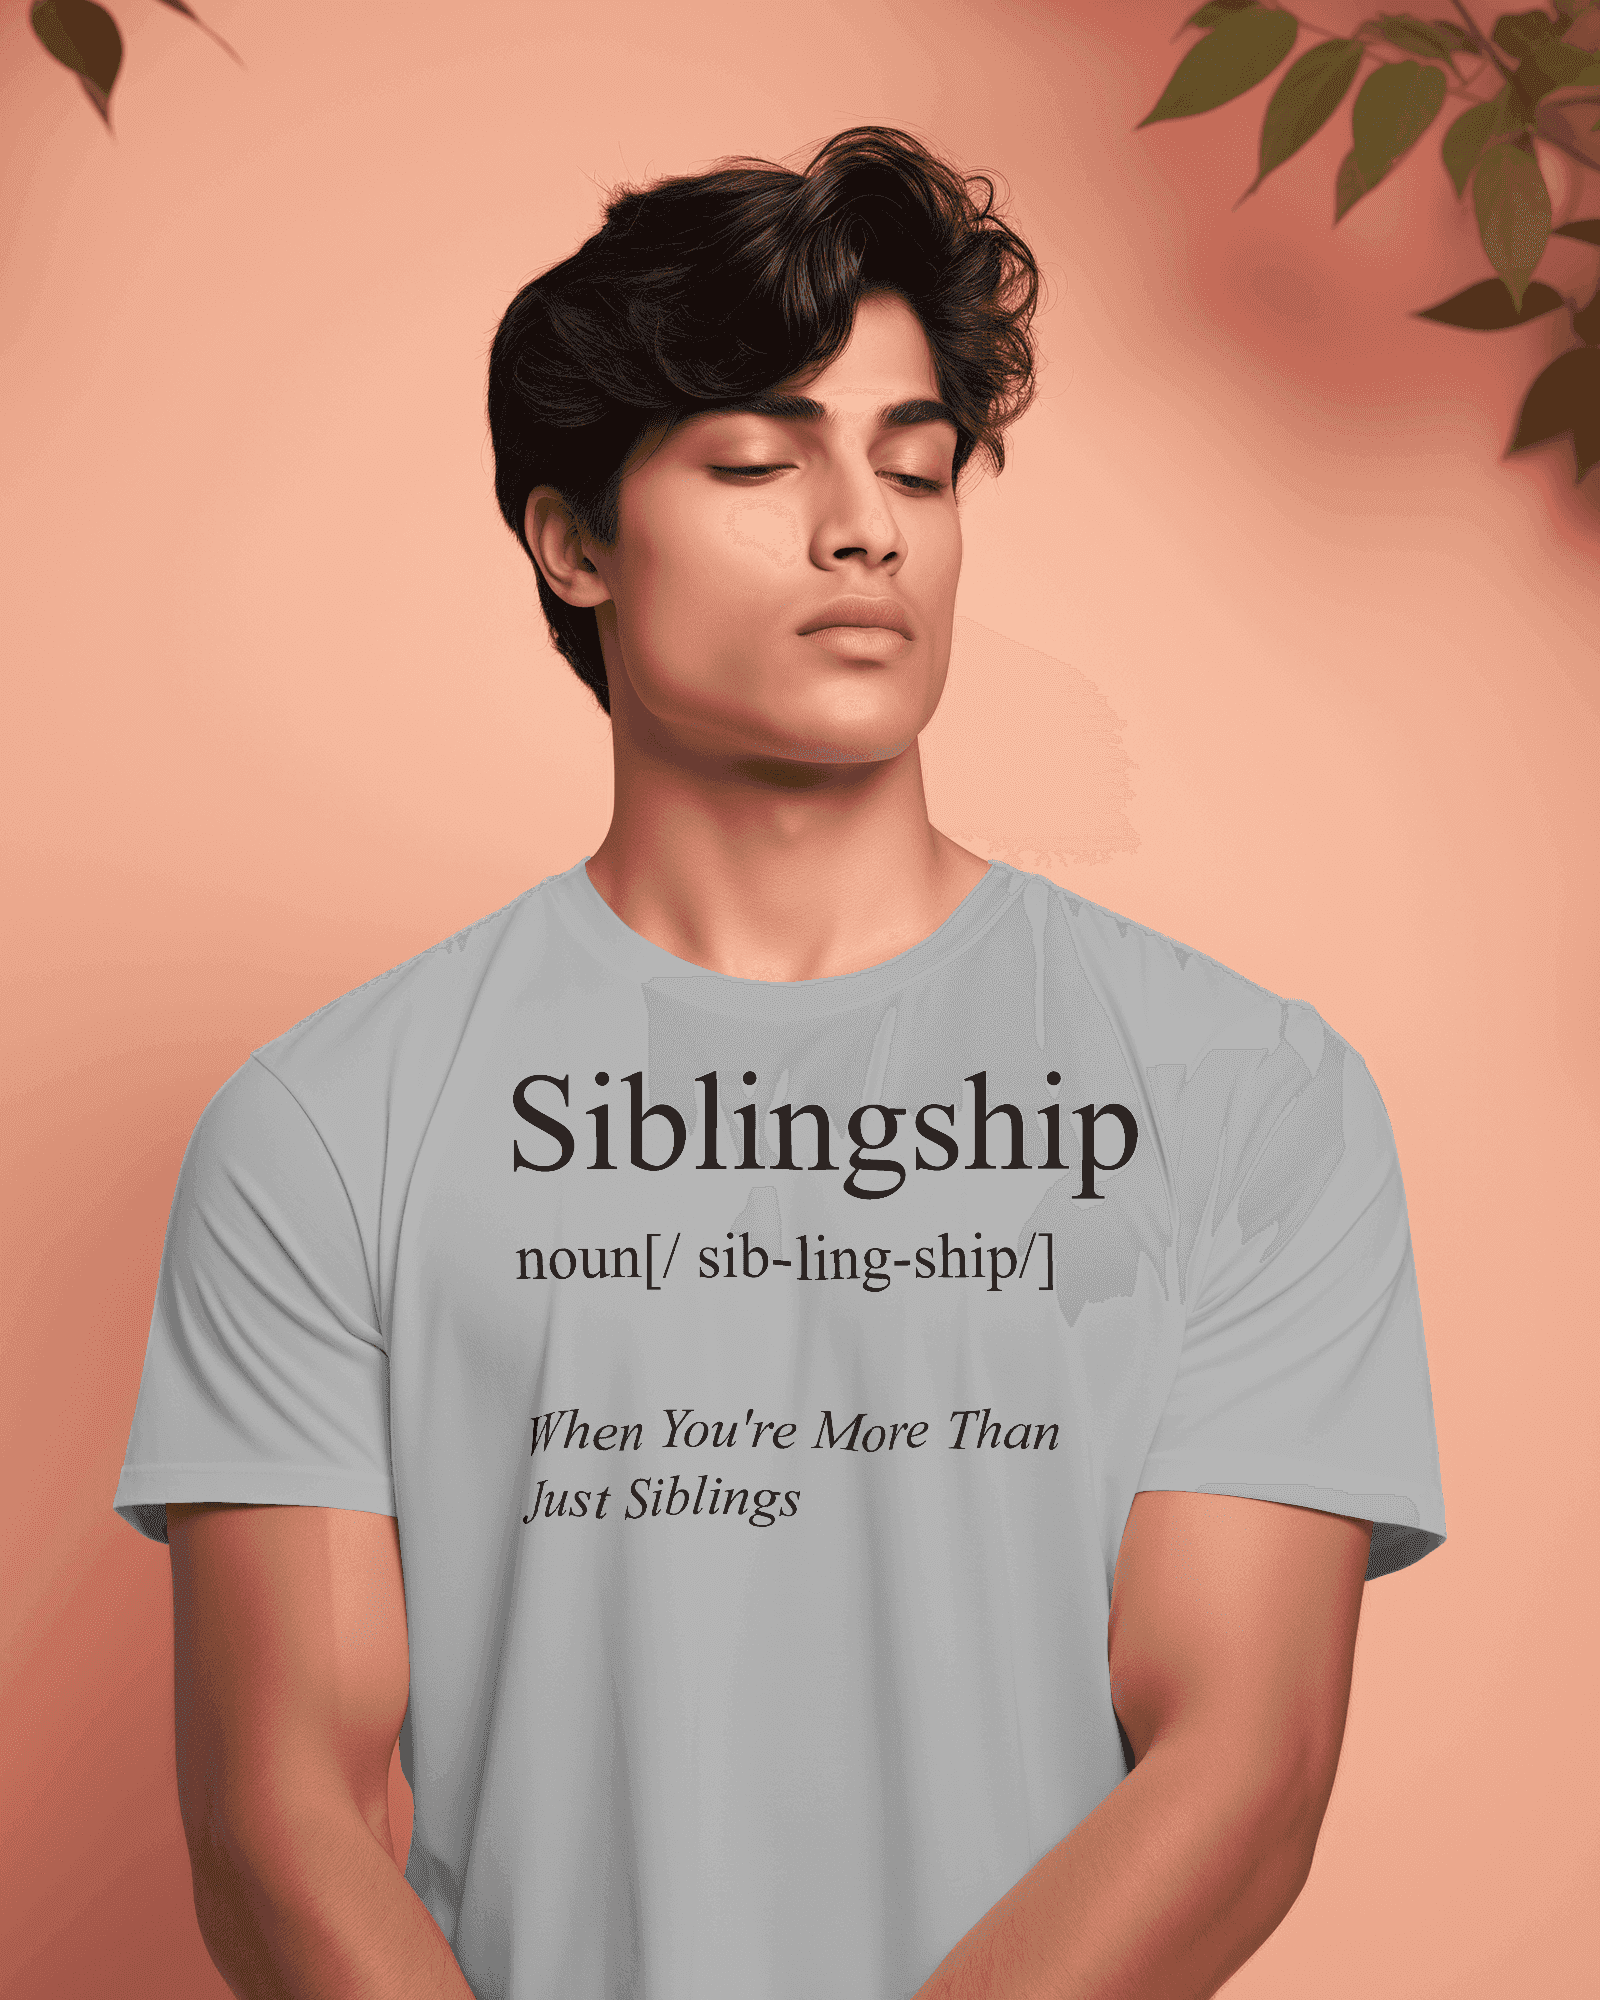 Siblingship Chronicles Men's Bonding T-Shirt - United in Laughter, Connected by Love